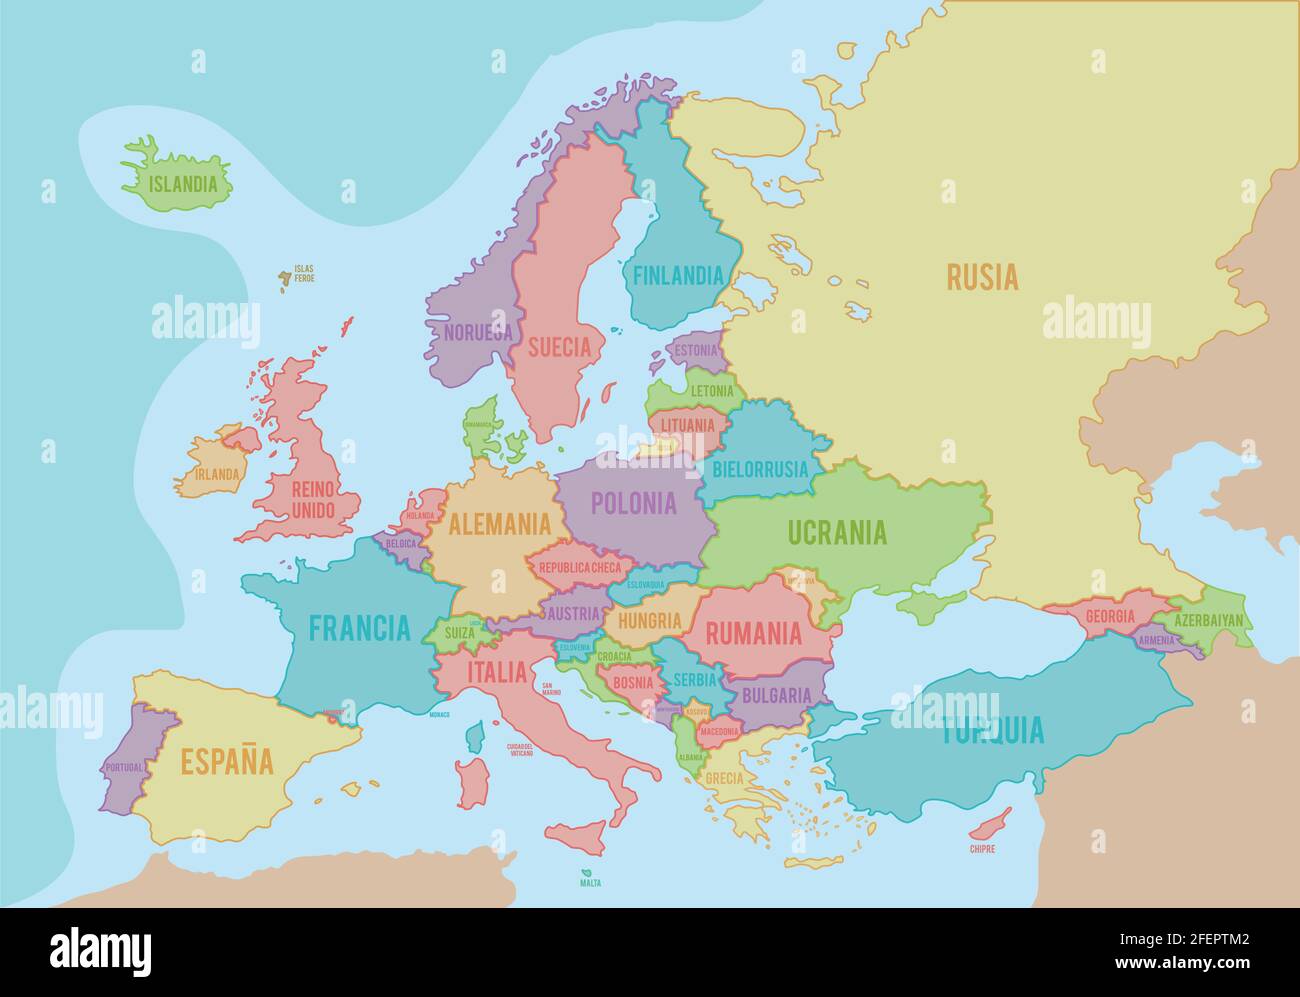 Political map of Europe with colors and borders for each country and names in Spanish. Vector illustration. Stock Vector